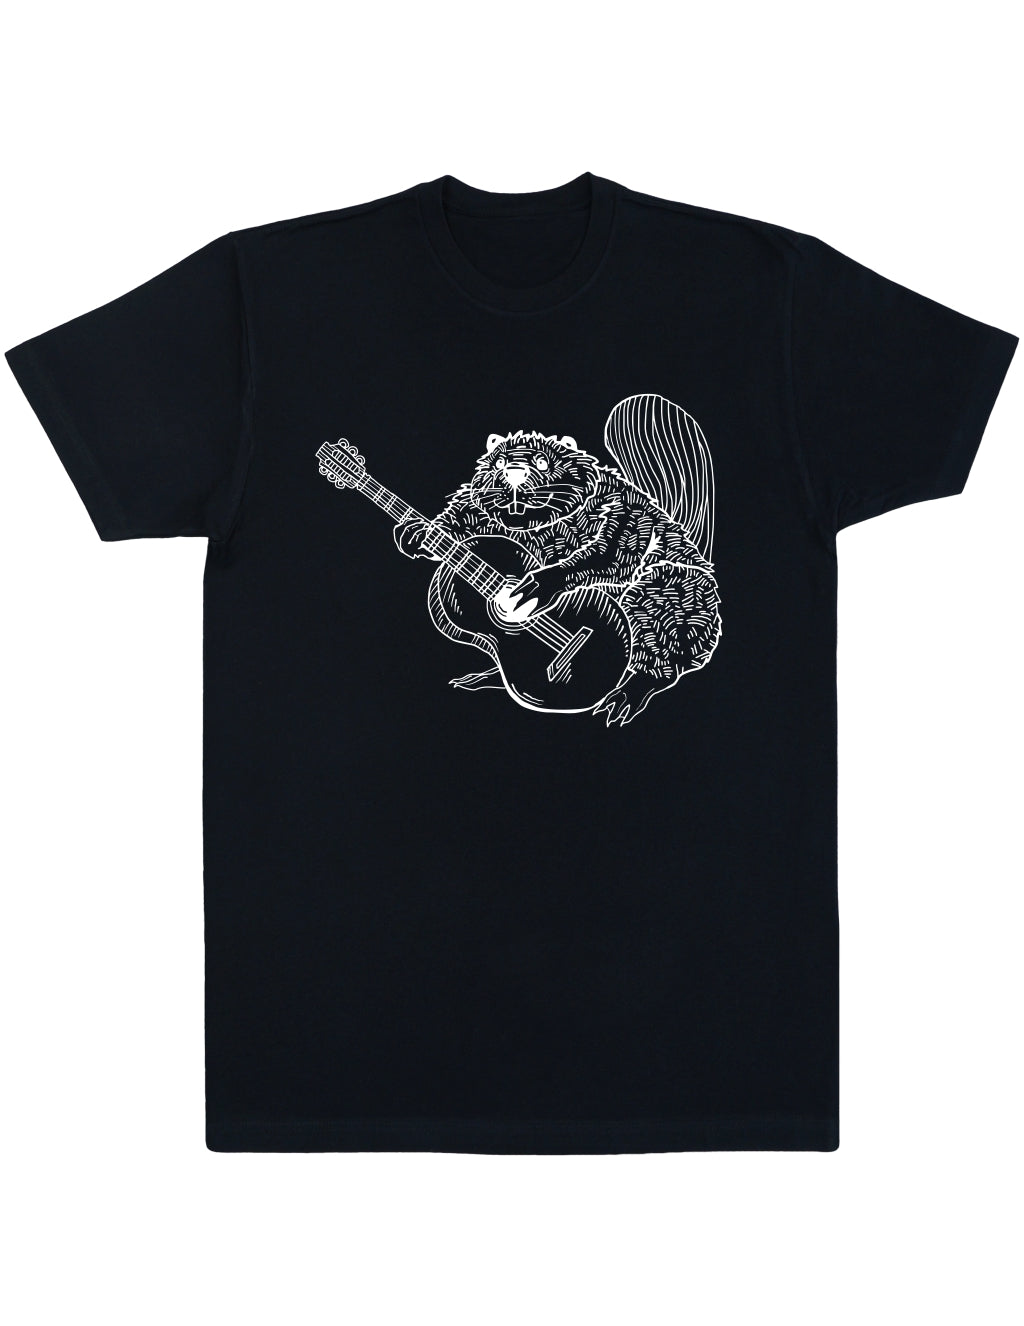 seembo-men-black-color-t-shirt-with-beaver-playing-guitar-design-on-it